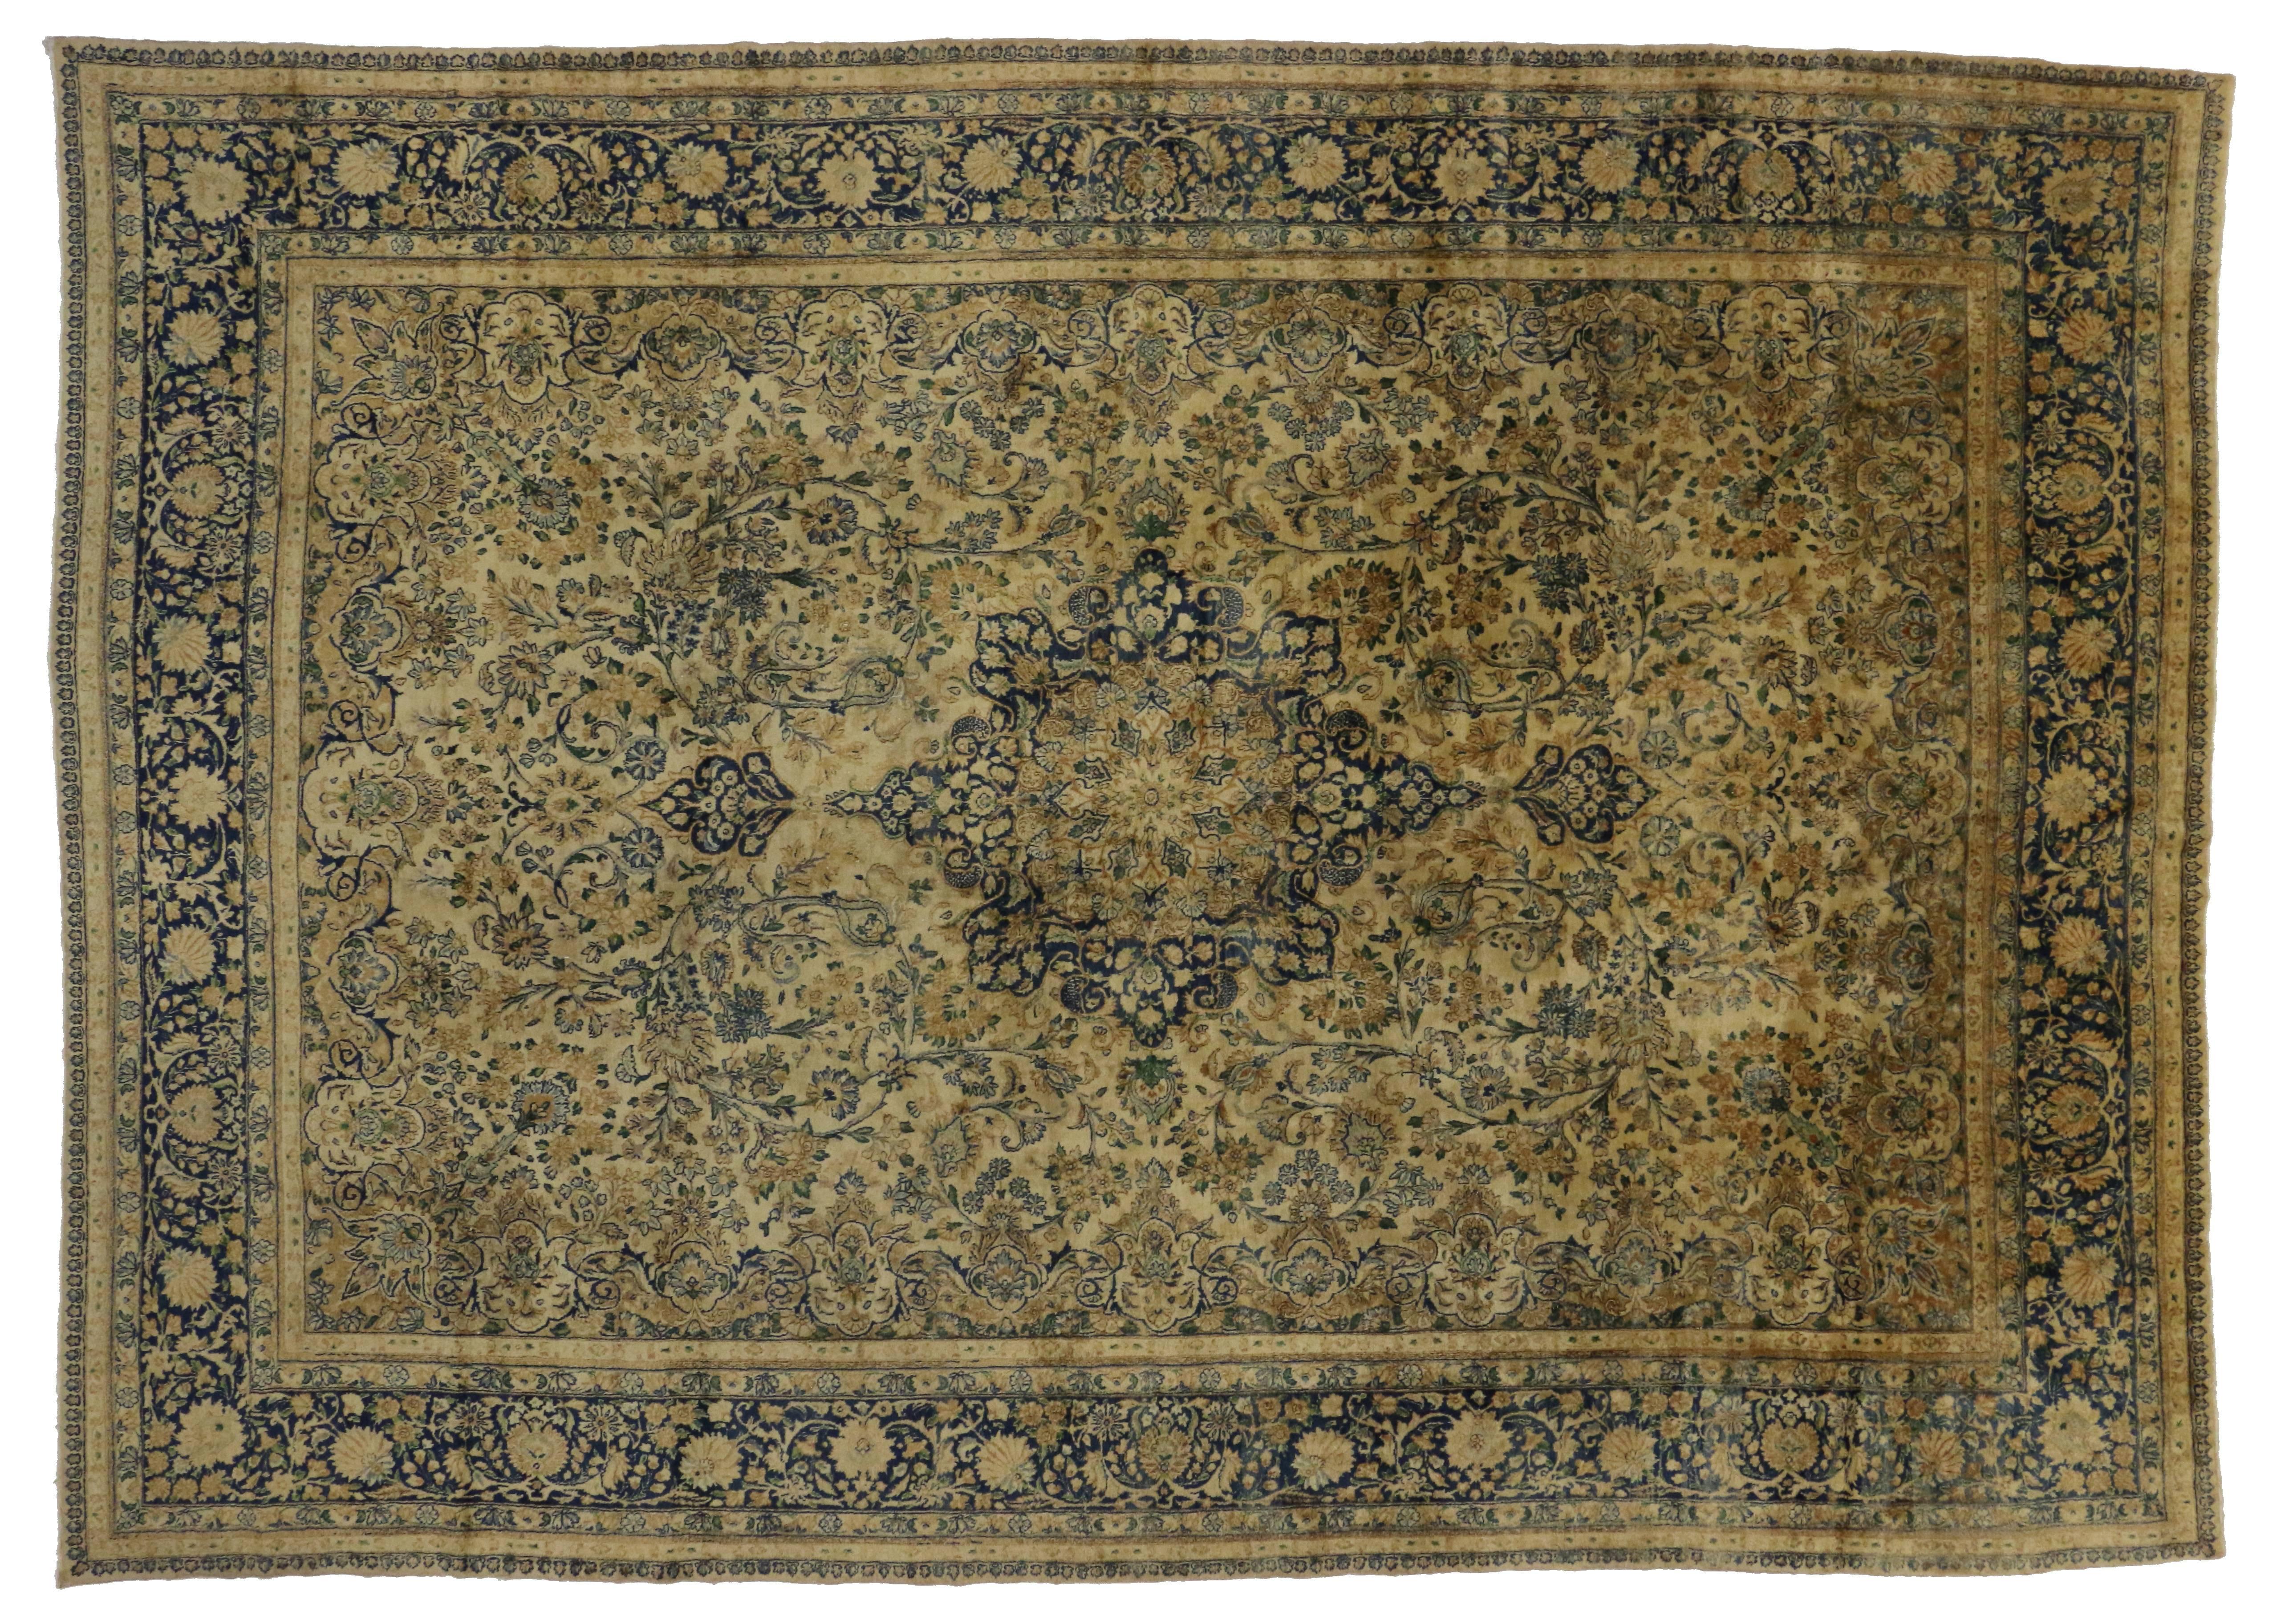 73582 Antique Persian Kerman Rug with Hollywood Regency Style. With a timeless floral pattern and rustic sensibility with a hint of romantic connotations, this hand knotted wool antique Persian Kerman rug beautifully embodies Hollywood Regency